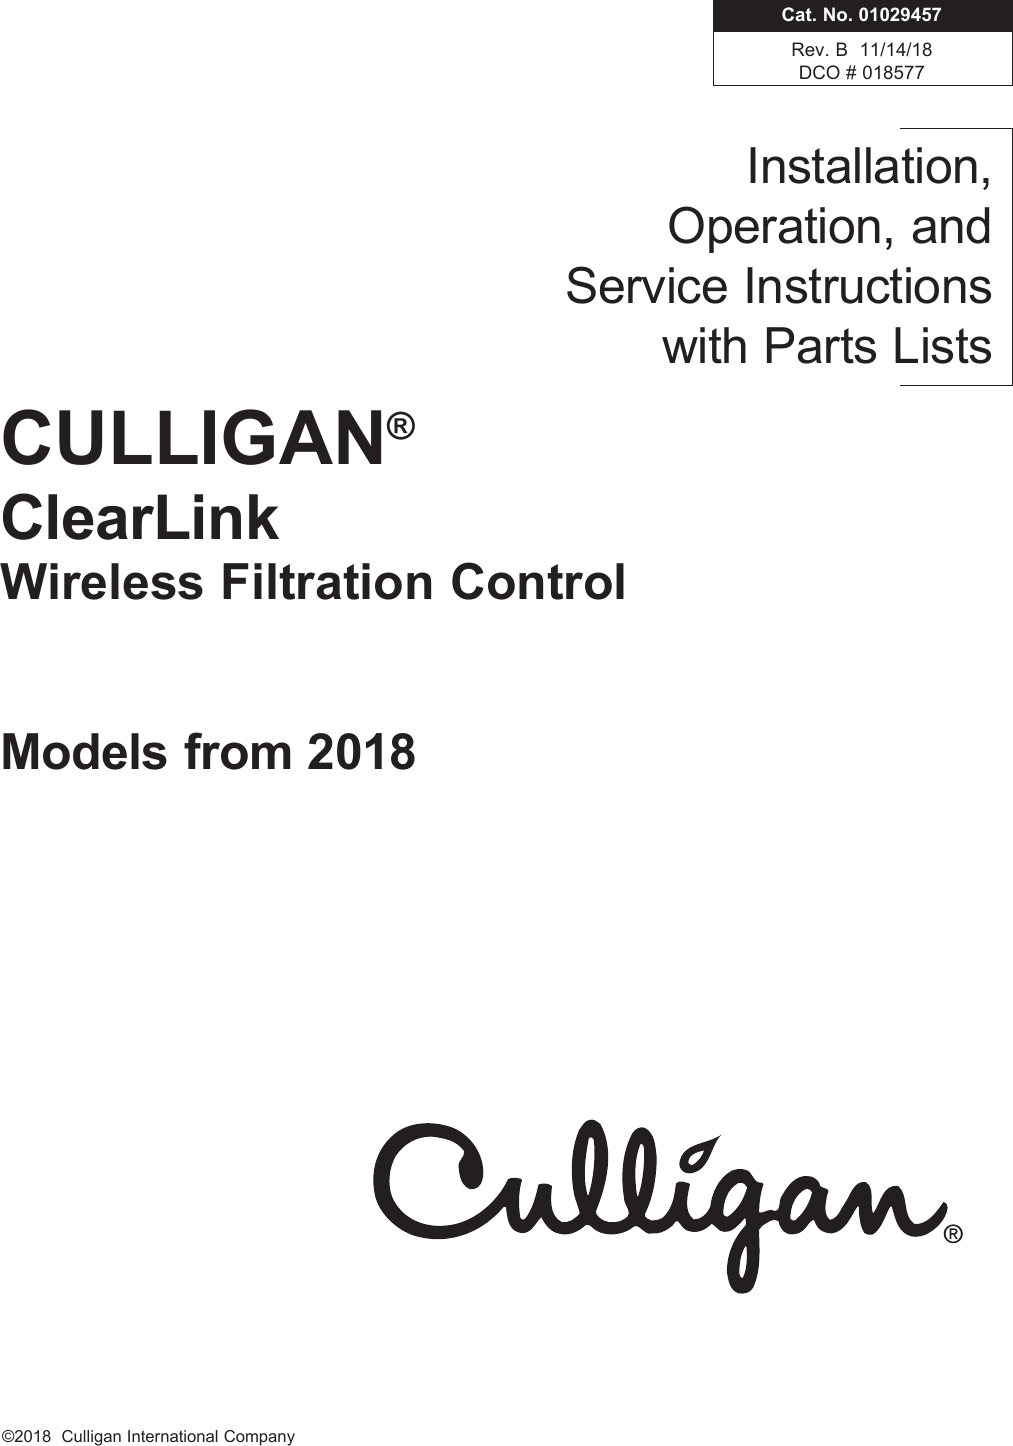 CULLIGAN®ClearLinkWireless Filtration ControlModels from 2018©2018  Culligan International Com pa nyInstallation,  Operation, and  Service Instructions with Parts ListsCat. No. 01029457Rev. B  11/14/18DCO # 018577